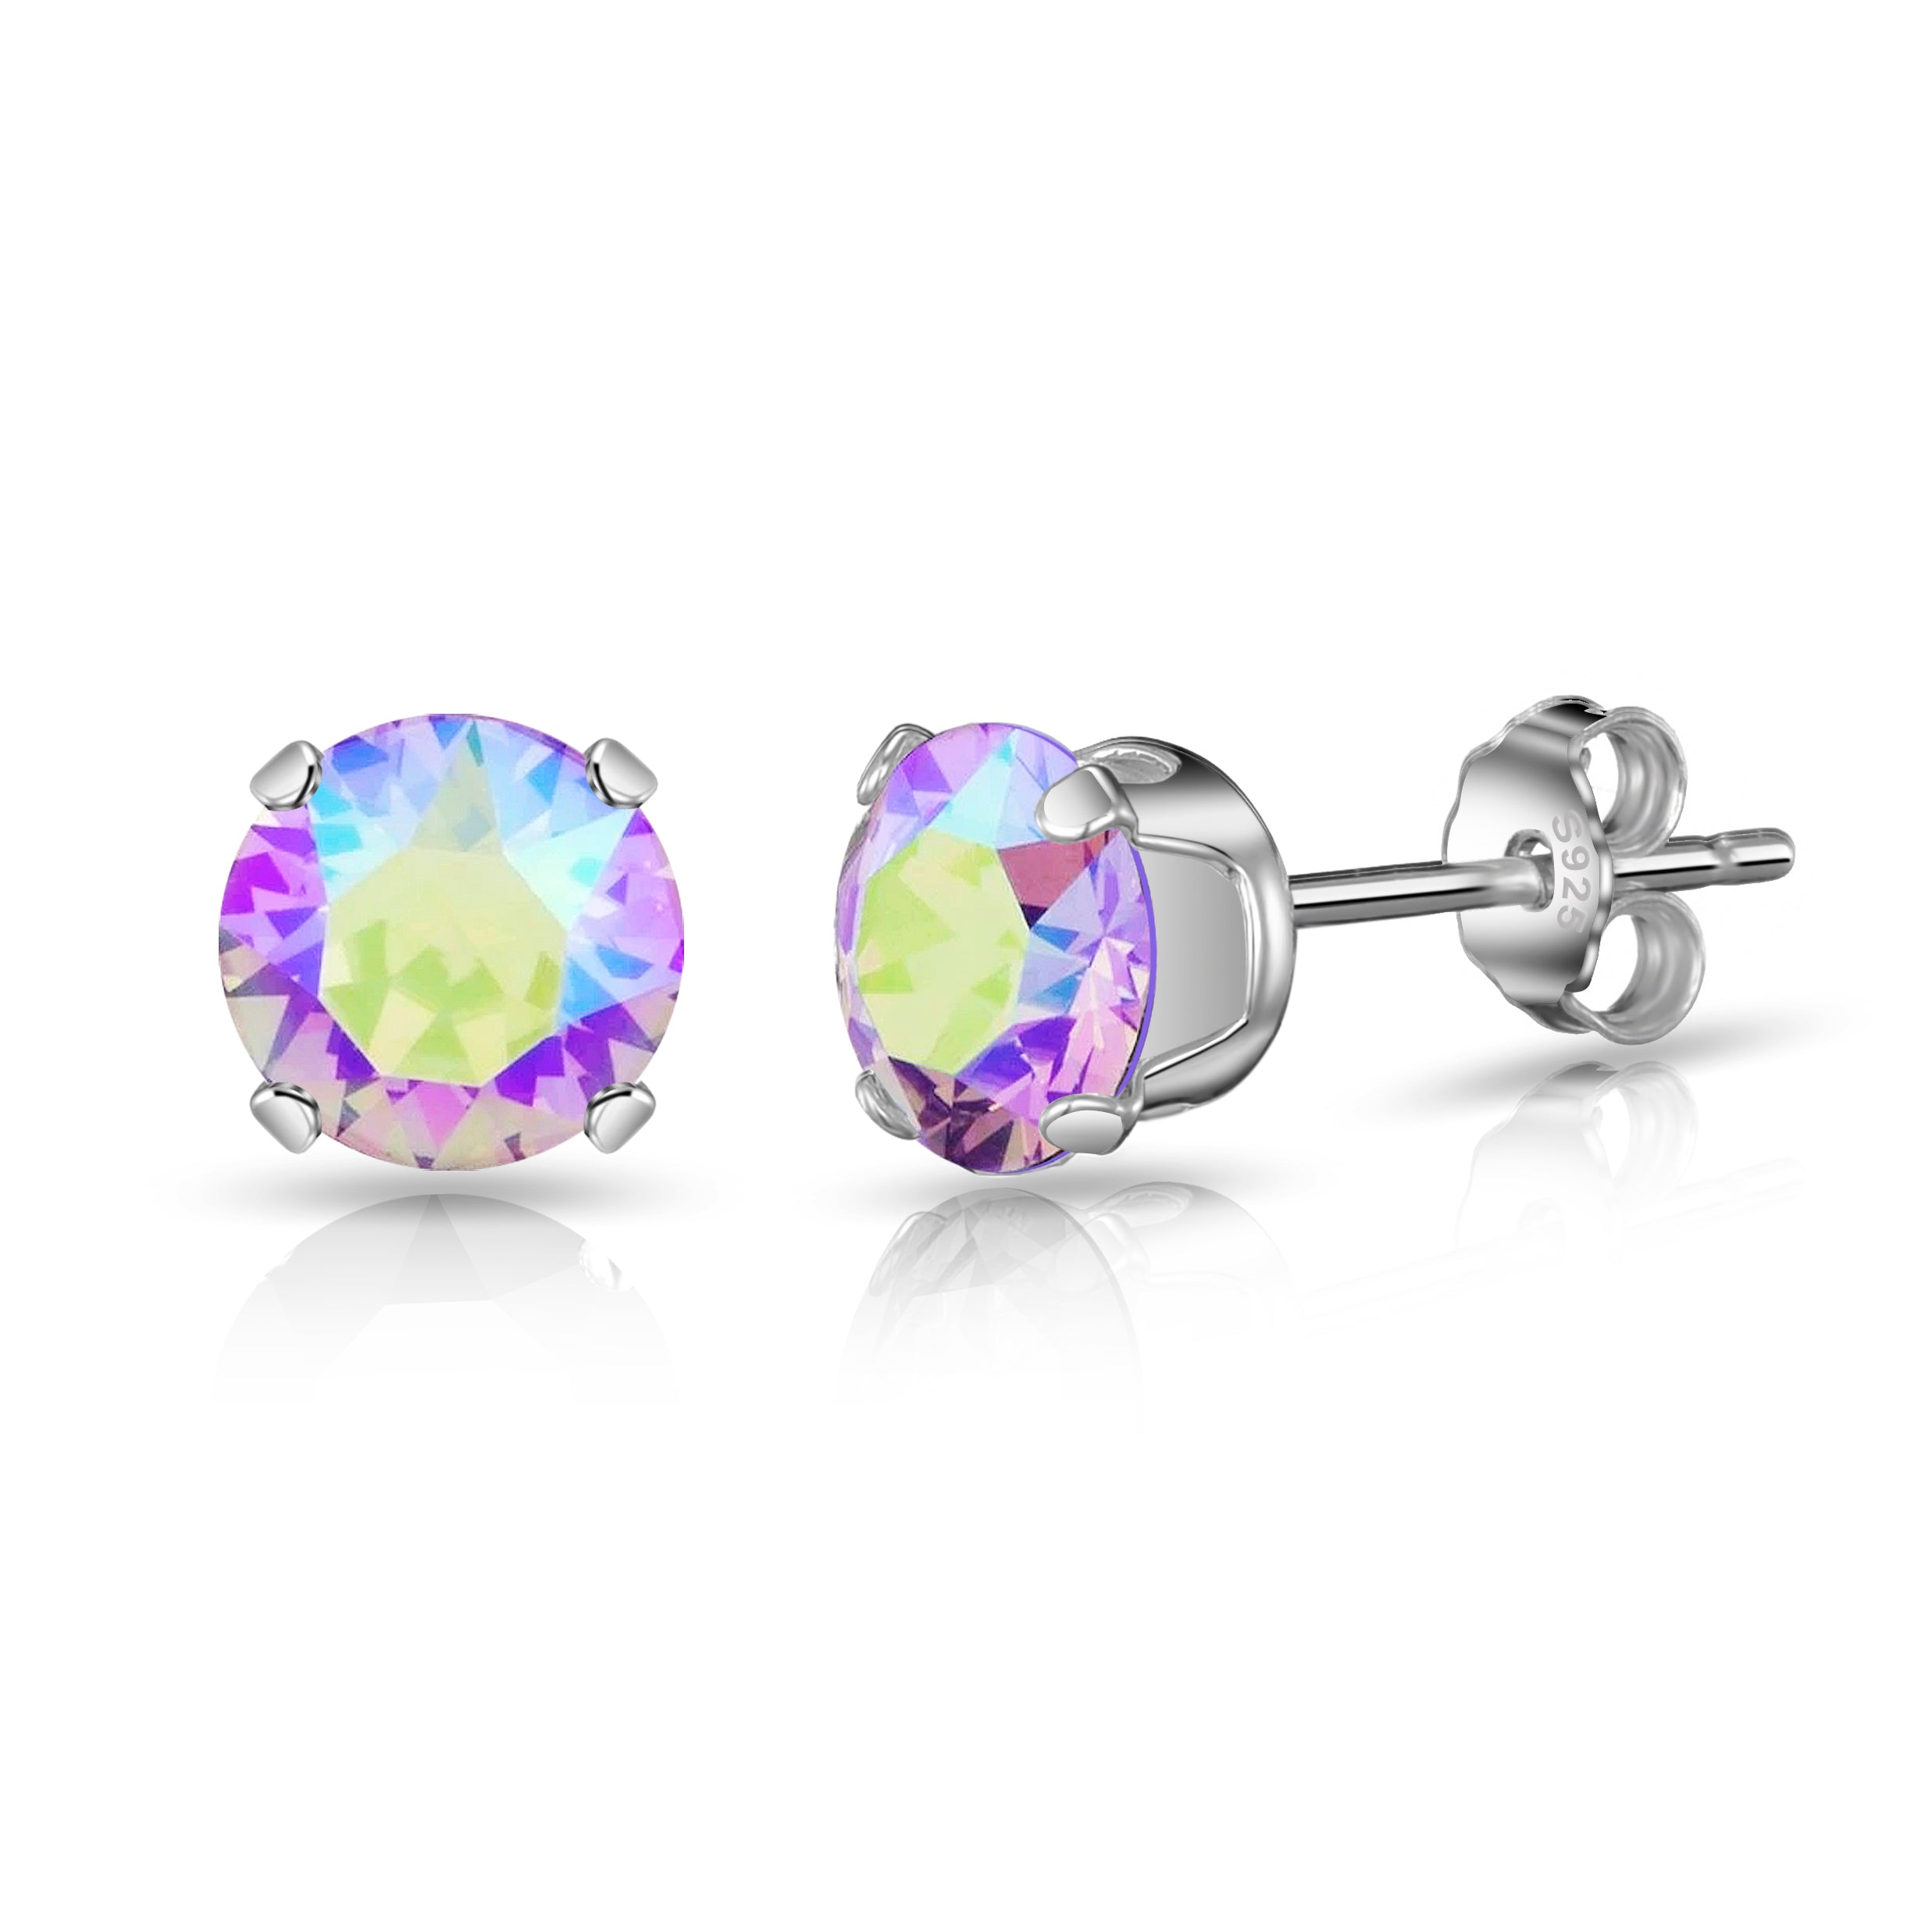 Sterling Silver Paradise Shine Earrings Created with Zircondia® Crystals by Philip Jones Jewellery